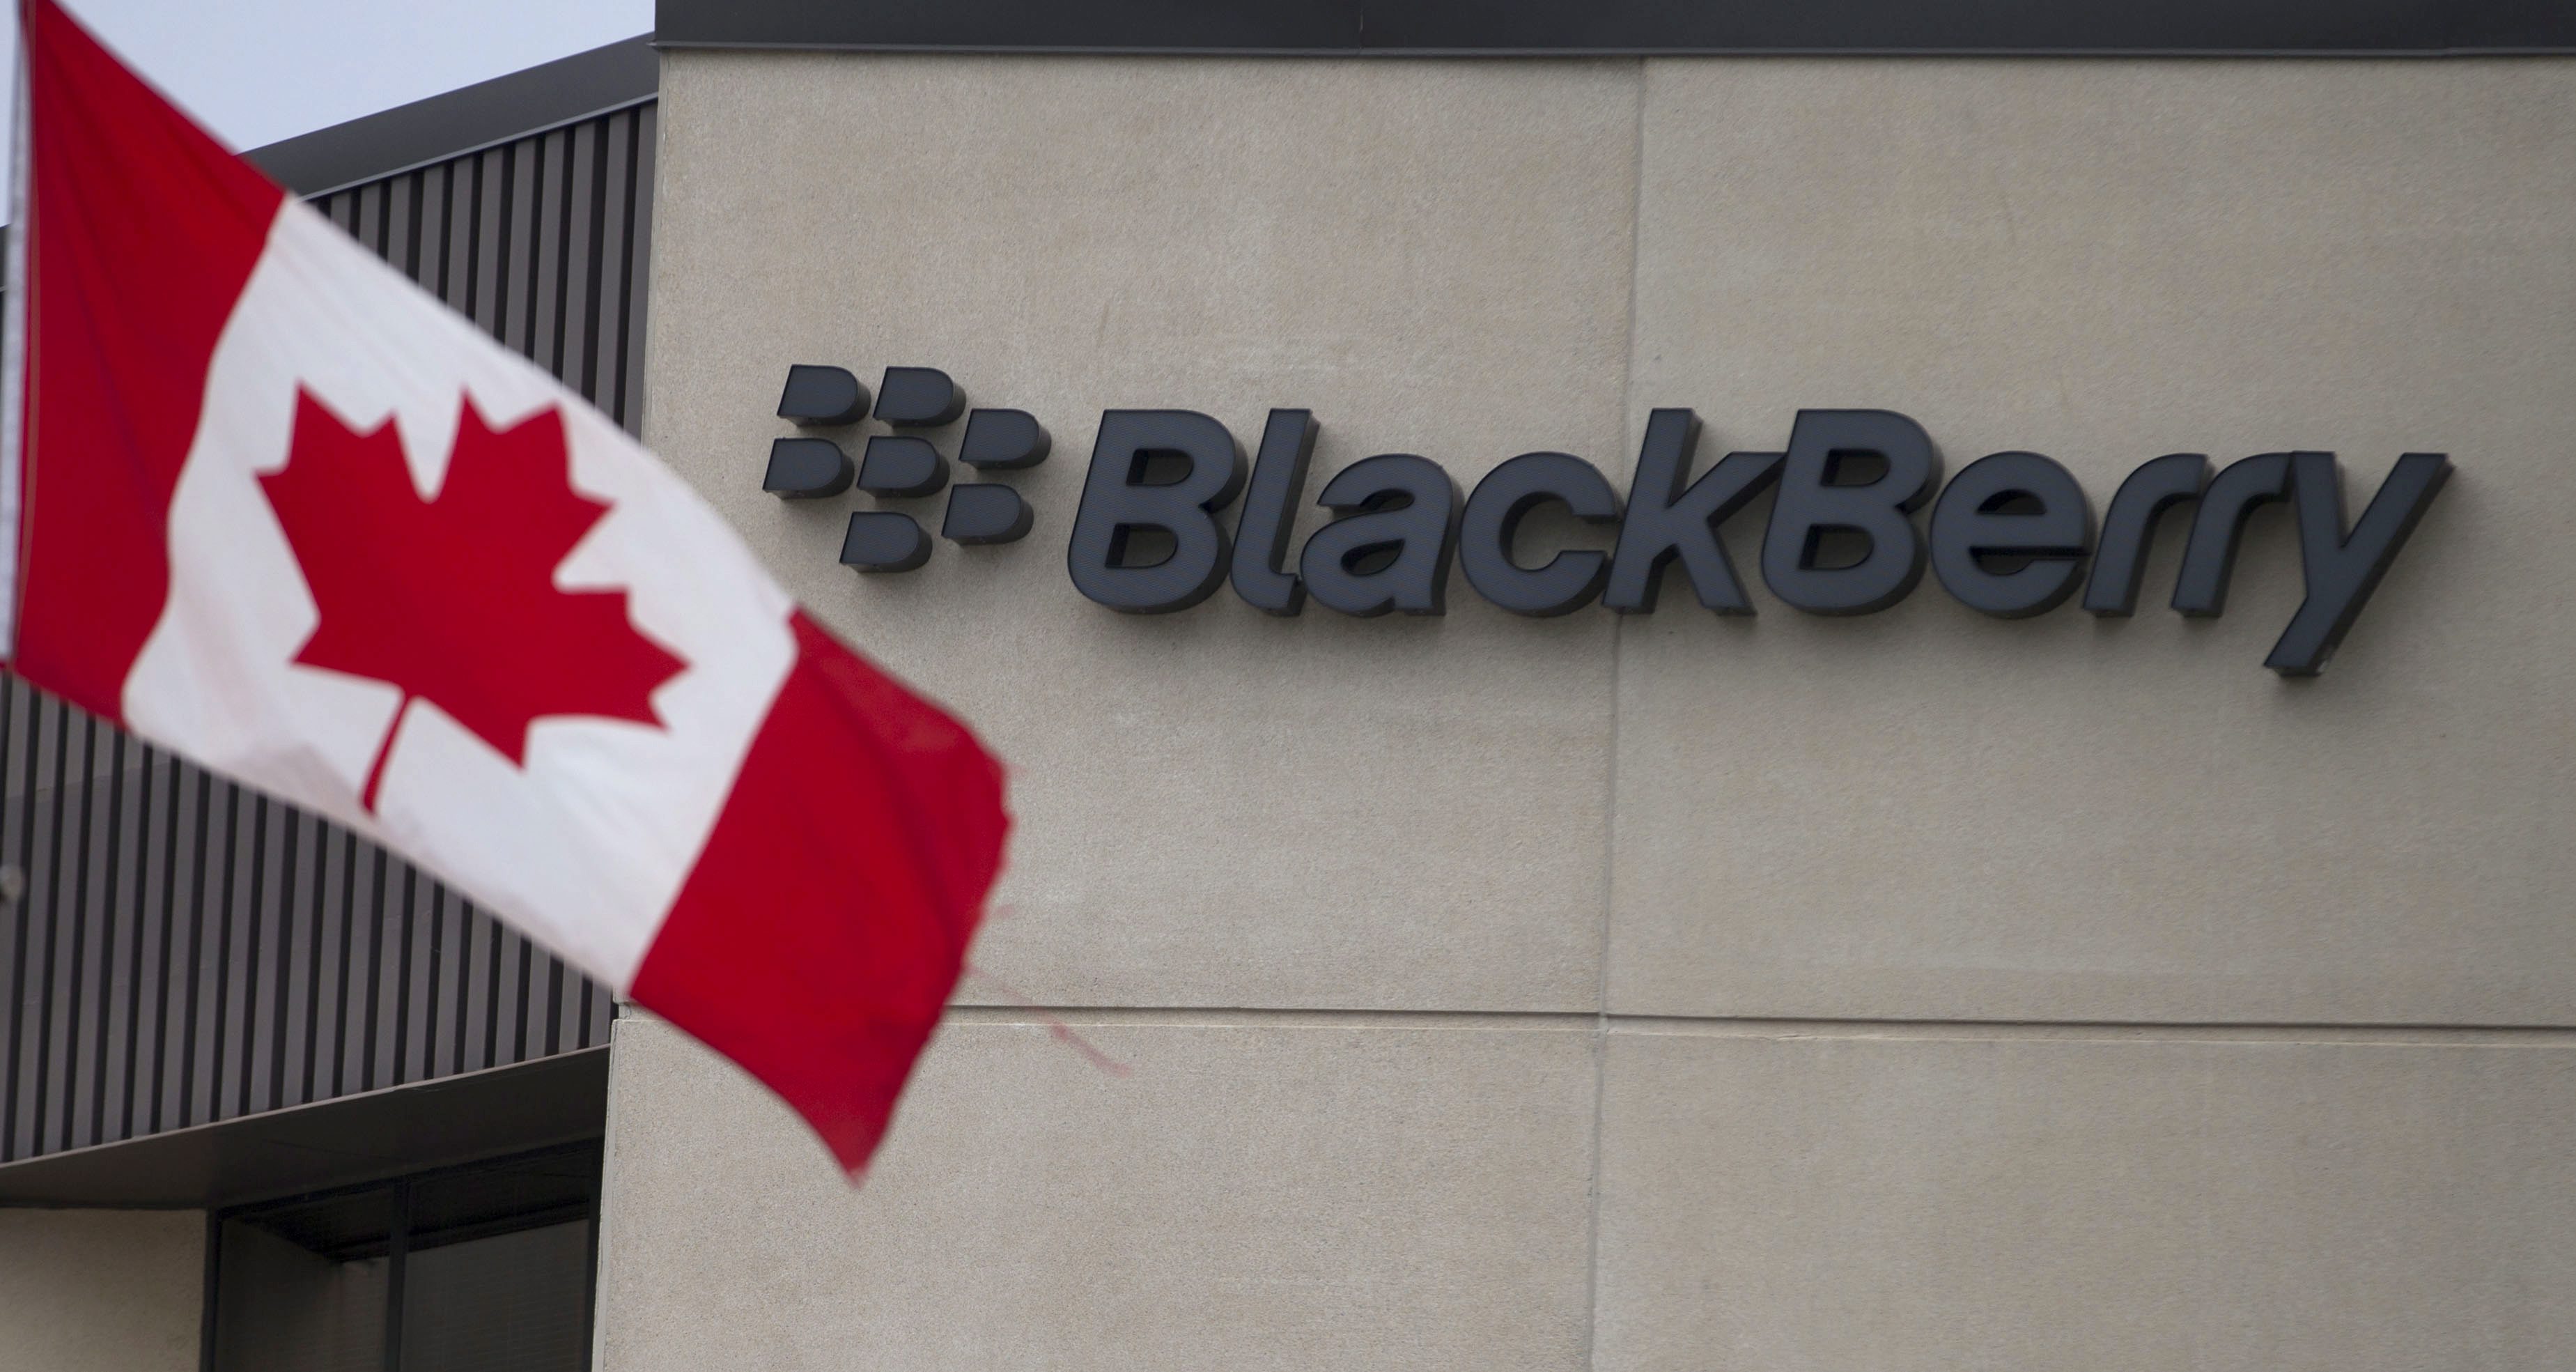 BlackBerry has sought to add value to its popular instant messaging service even as its handsets lose ground. Photo: AP